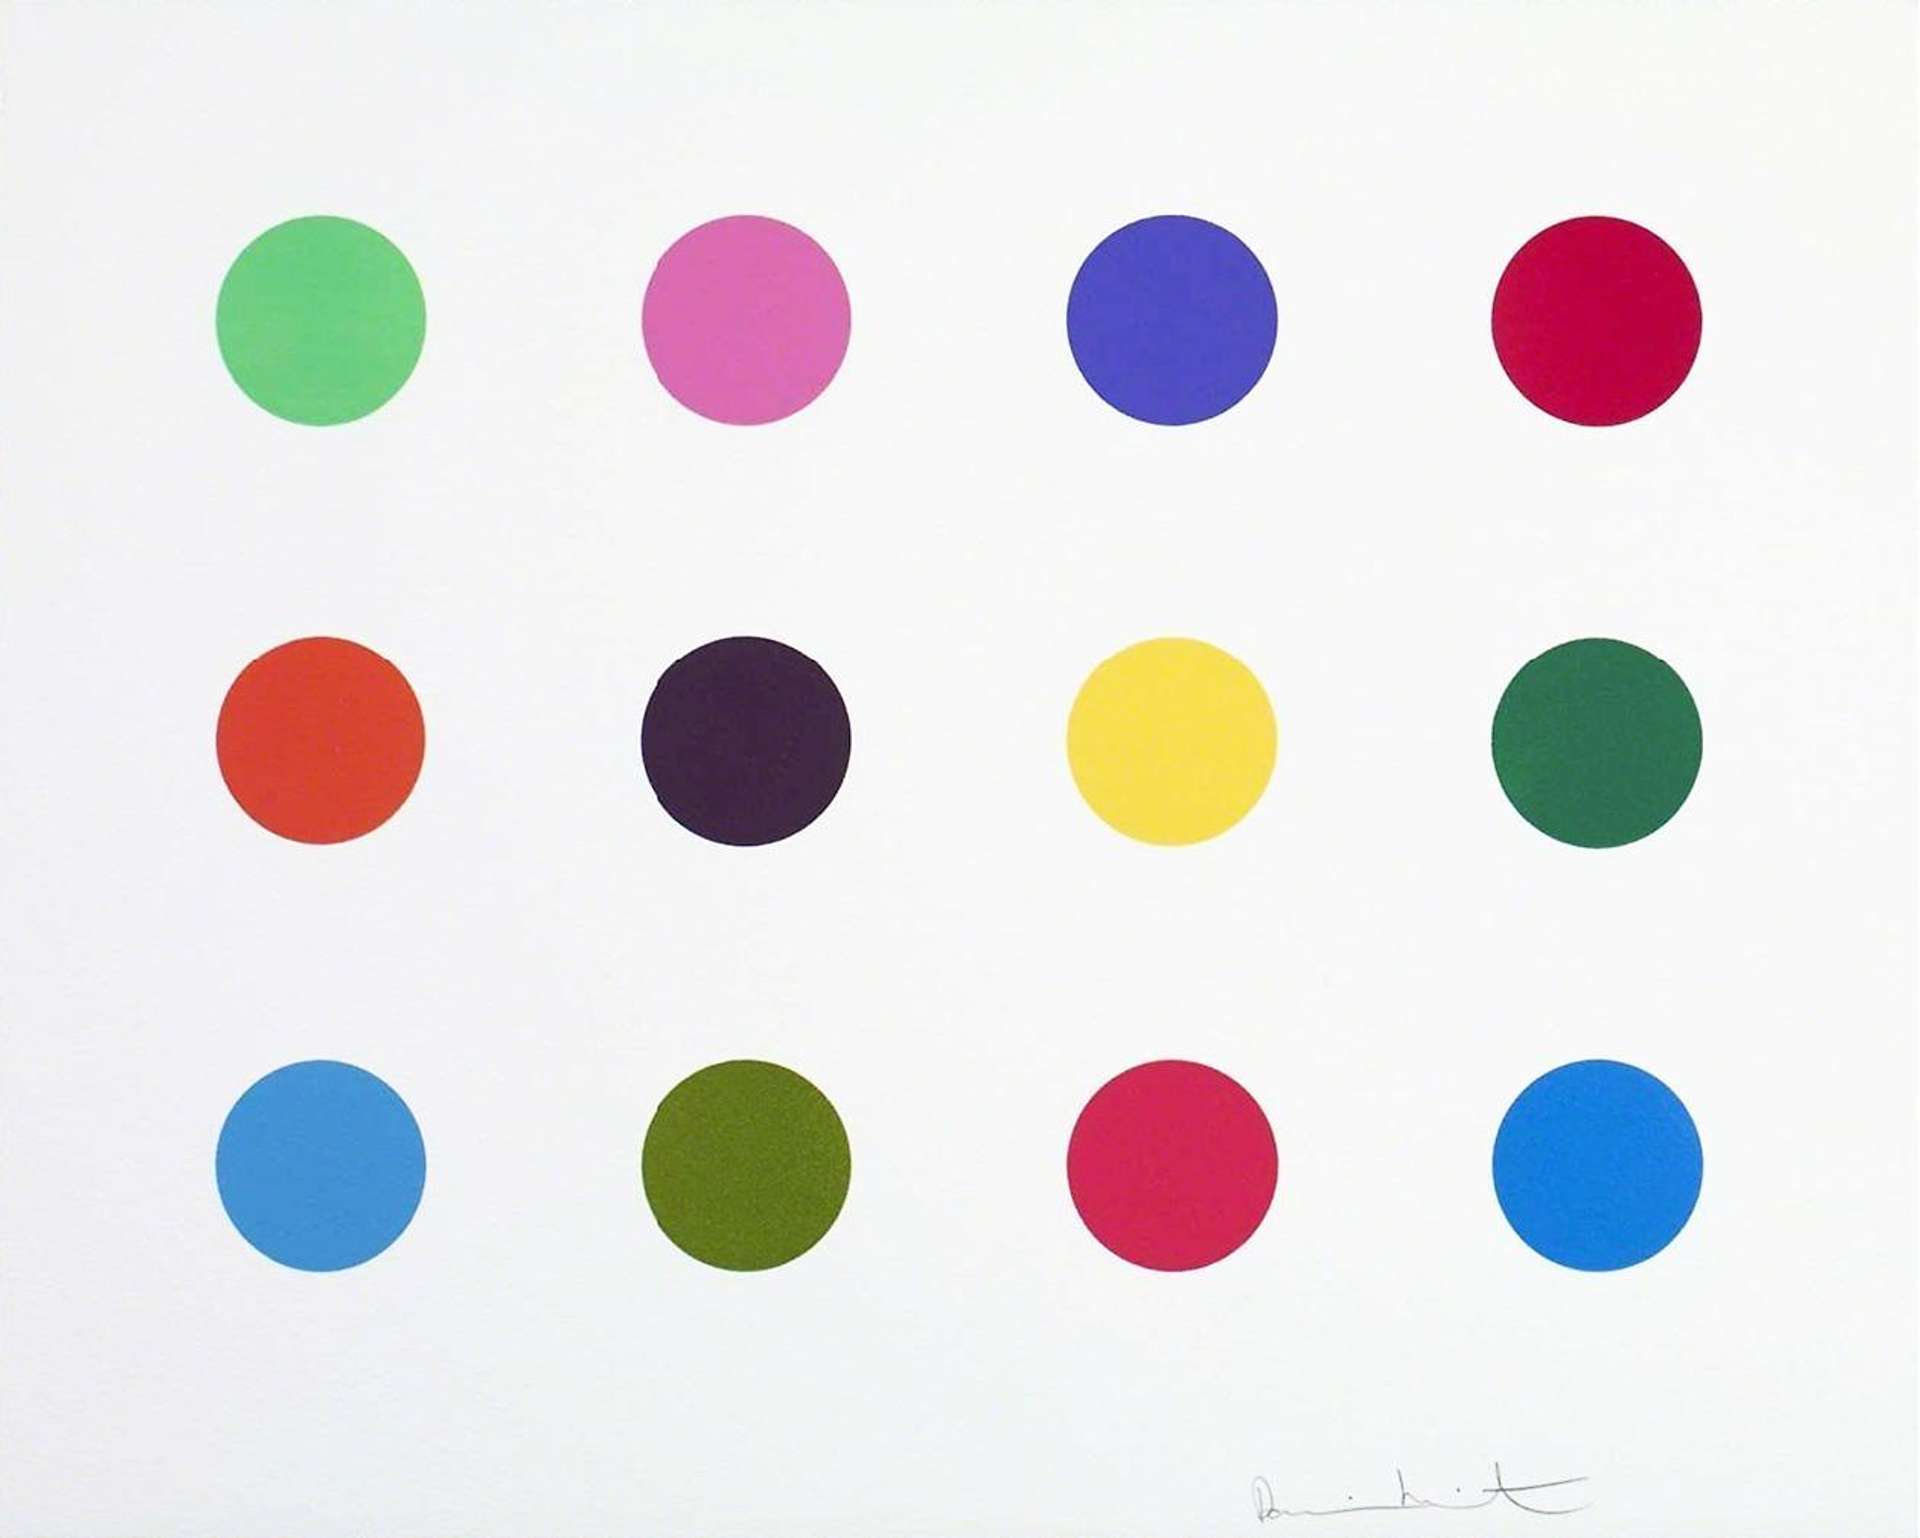 A woodcut print by Damien Hirst depicting 12 coloured spots against a white background.